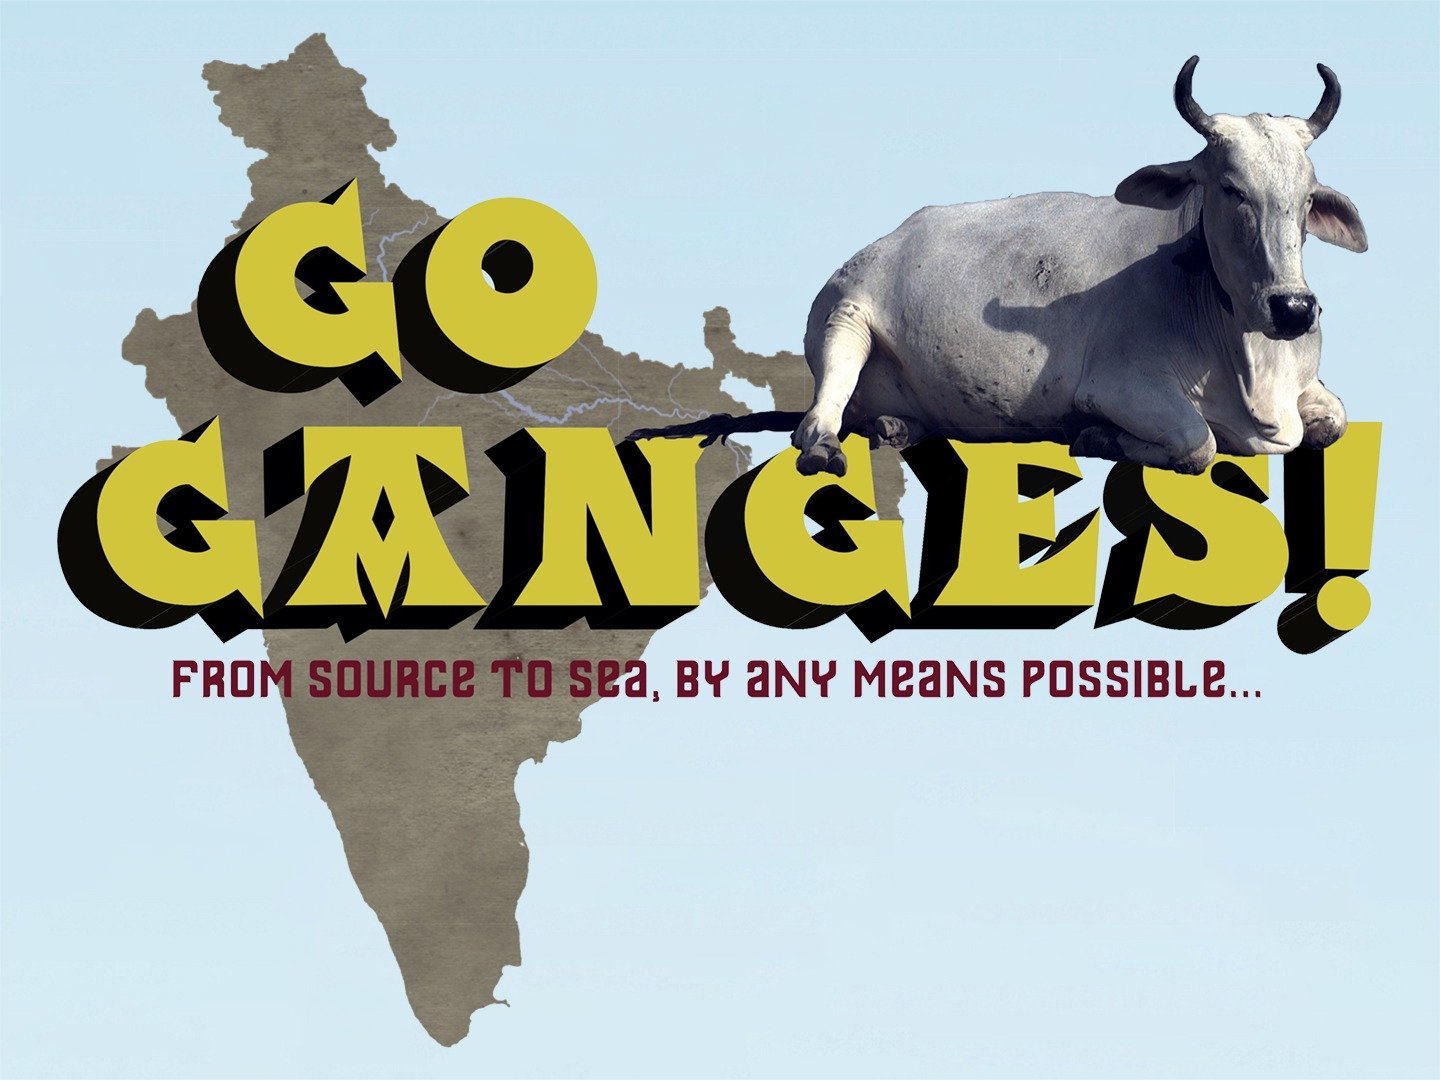 go-ganges-pictures-rotten-tomatoes